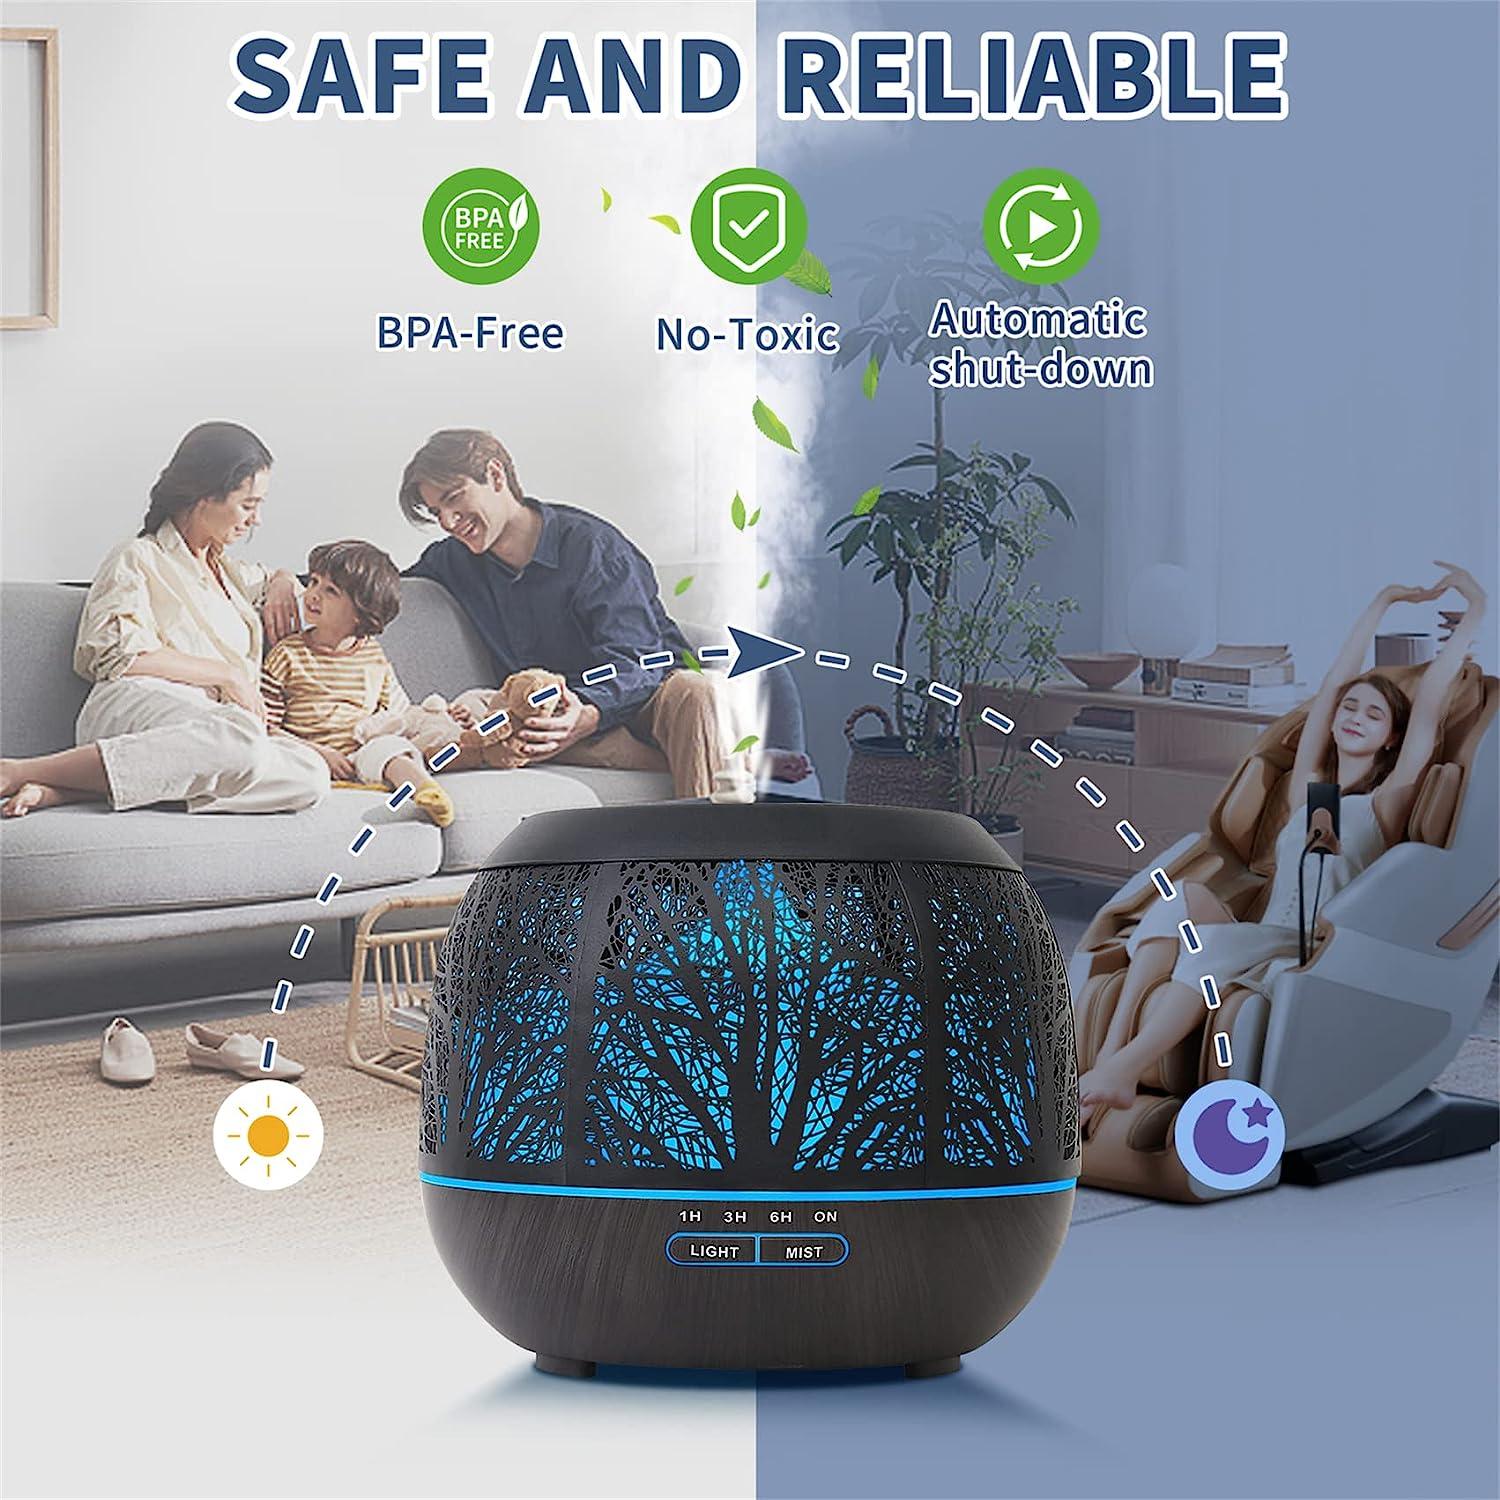 Essential Oil Diffuser Humidifier for Home: 400ml Ultrasonic Aroma